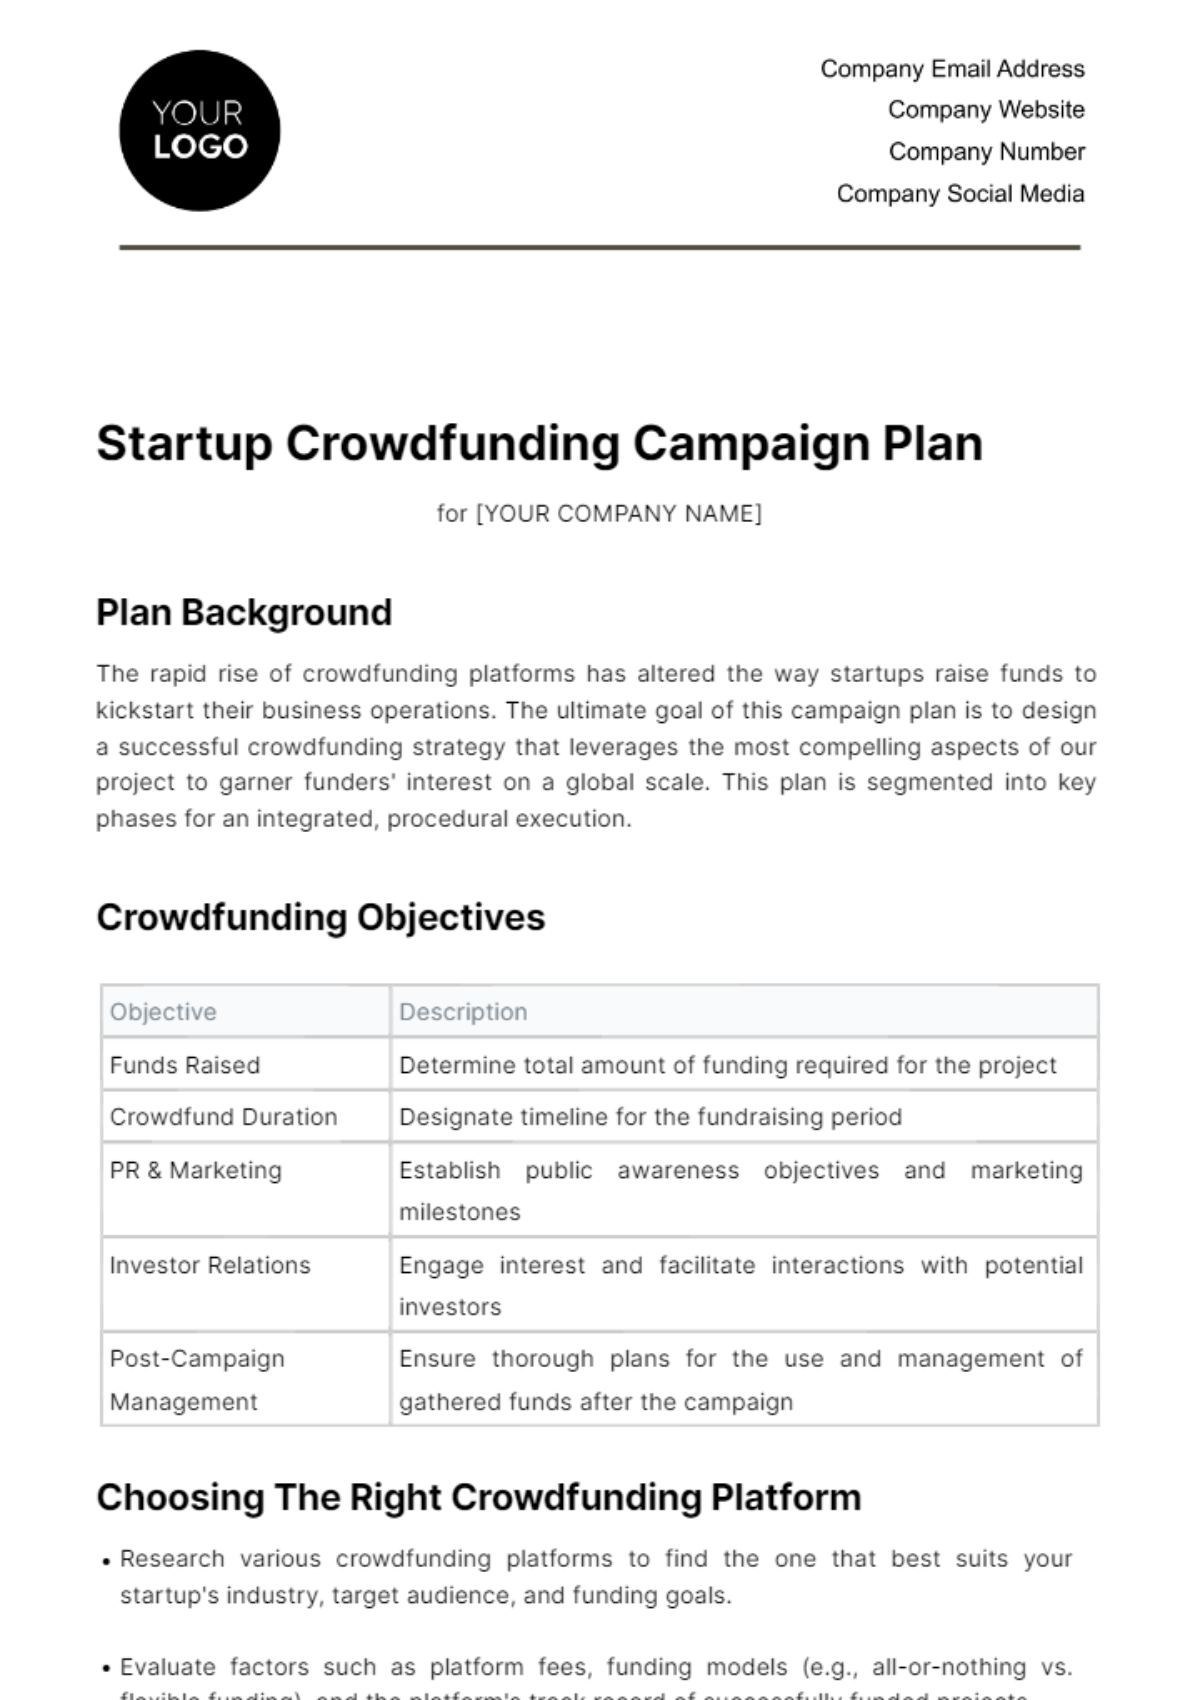 Startup Crowdfunding Campaign Plan Template